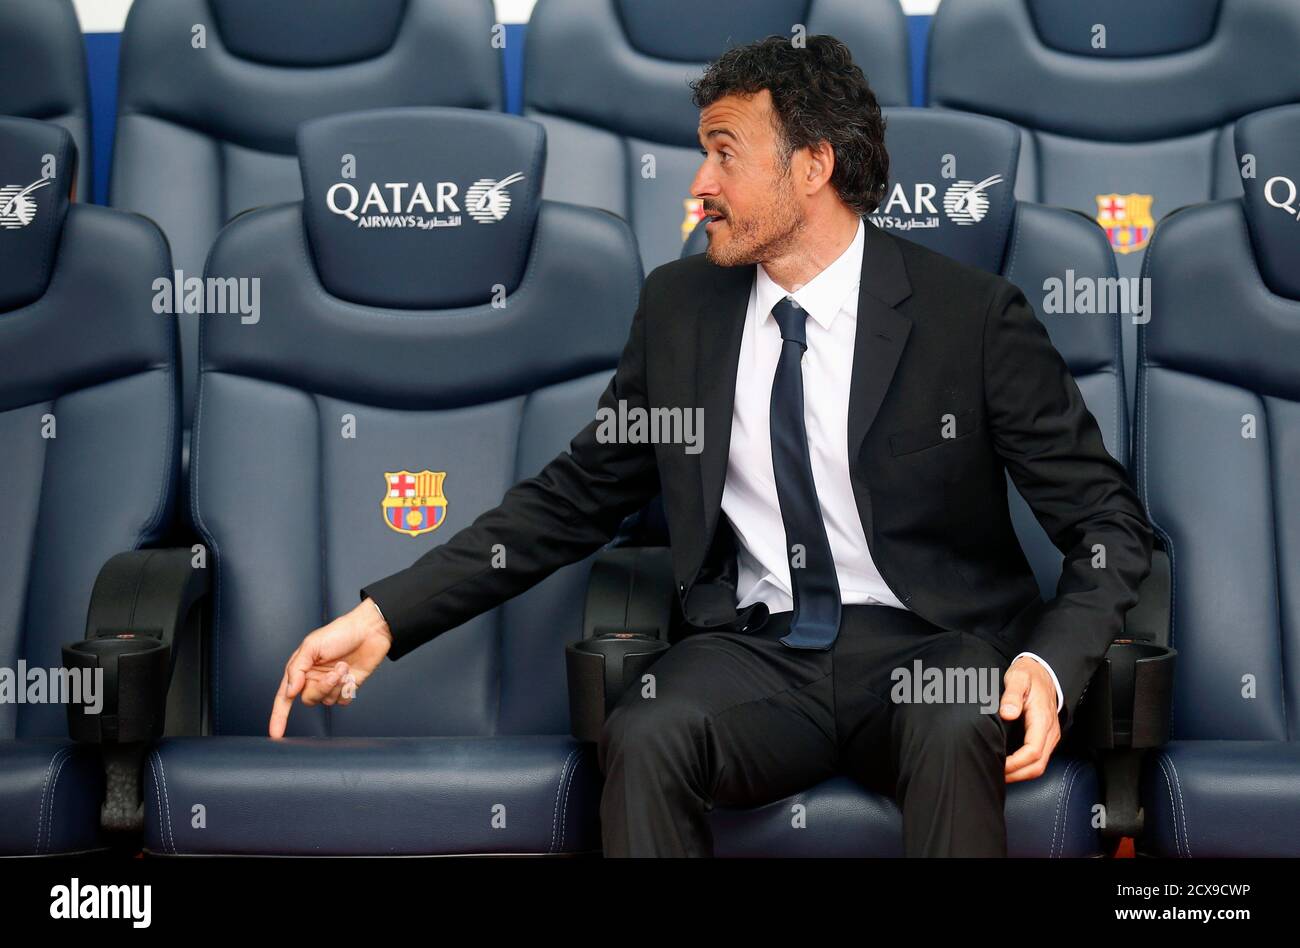 FC Barcelona's new coach Luis Enrique Martinez gestures to the bench after  signing a two-year contract at Camp Nou stadium in Barcelona May 21, 2014.  REUTERS/Albert Gea (SPAIN - Tags: SPORT SOCCER